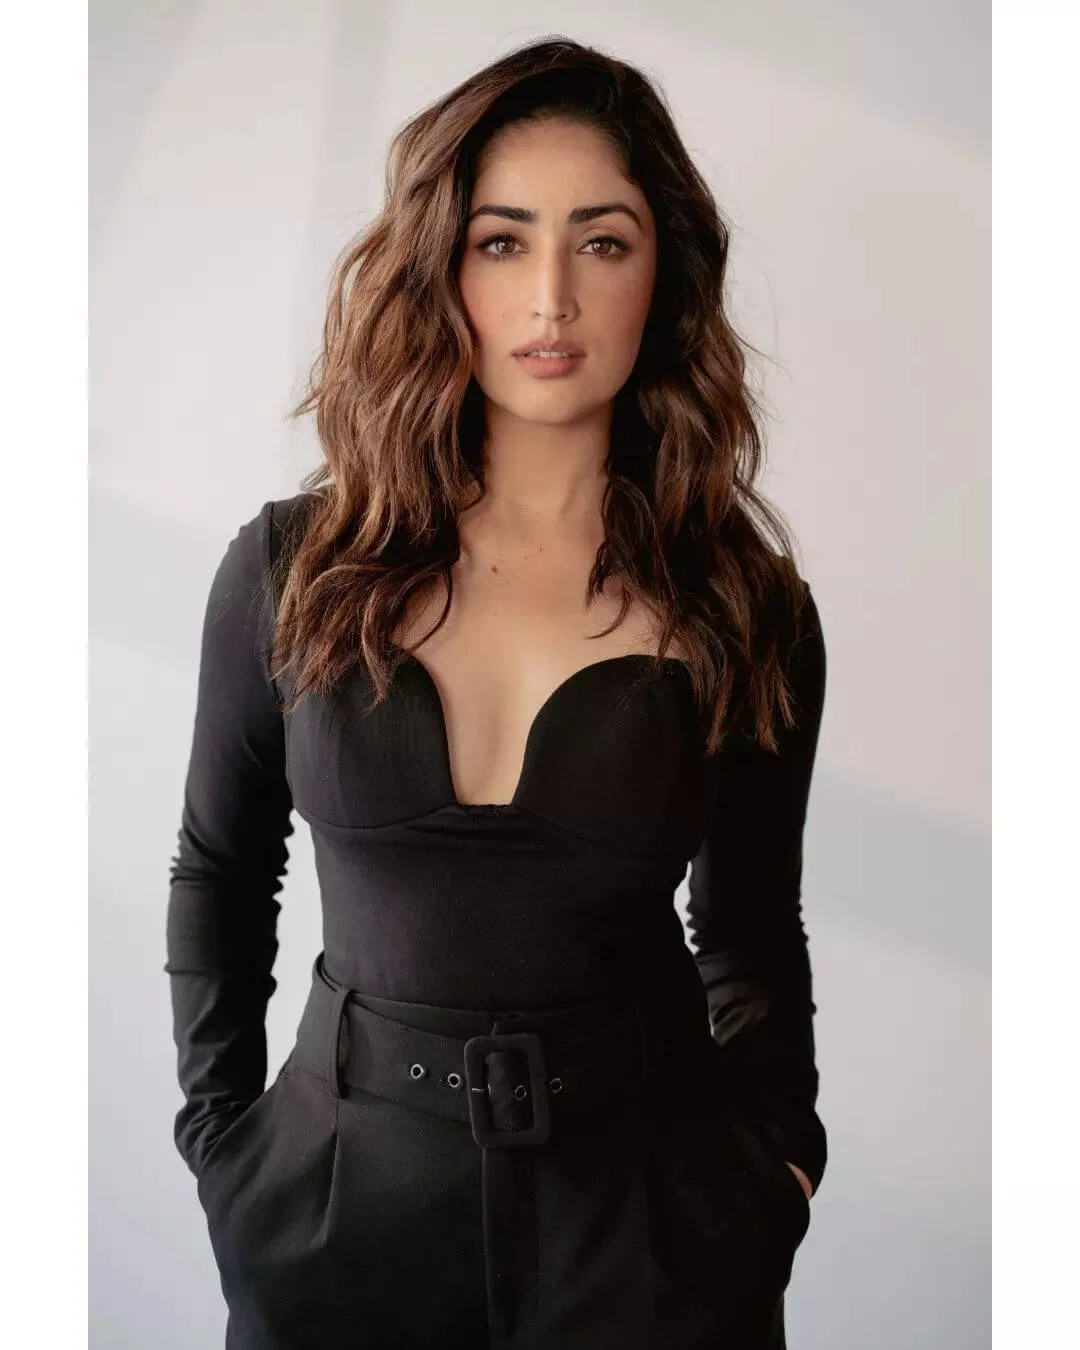 Yami Gautam in black sexy outfit